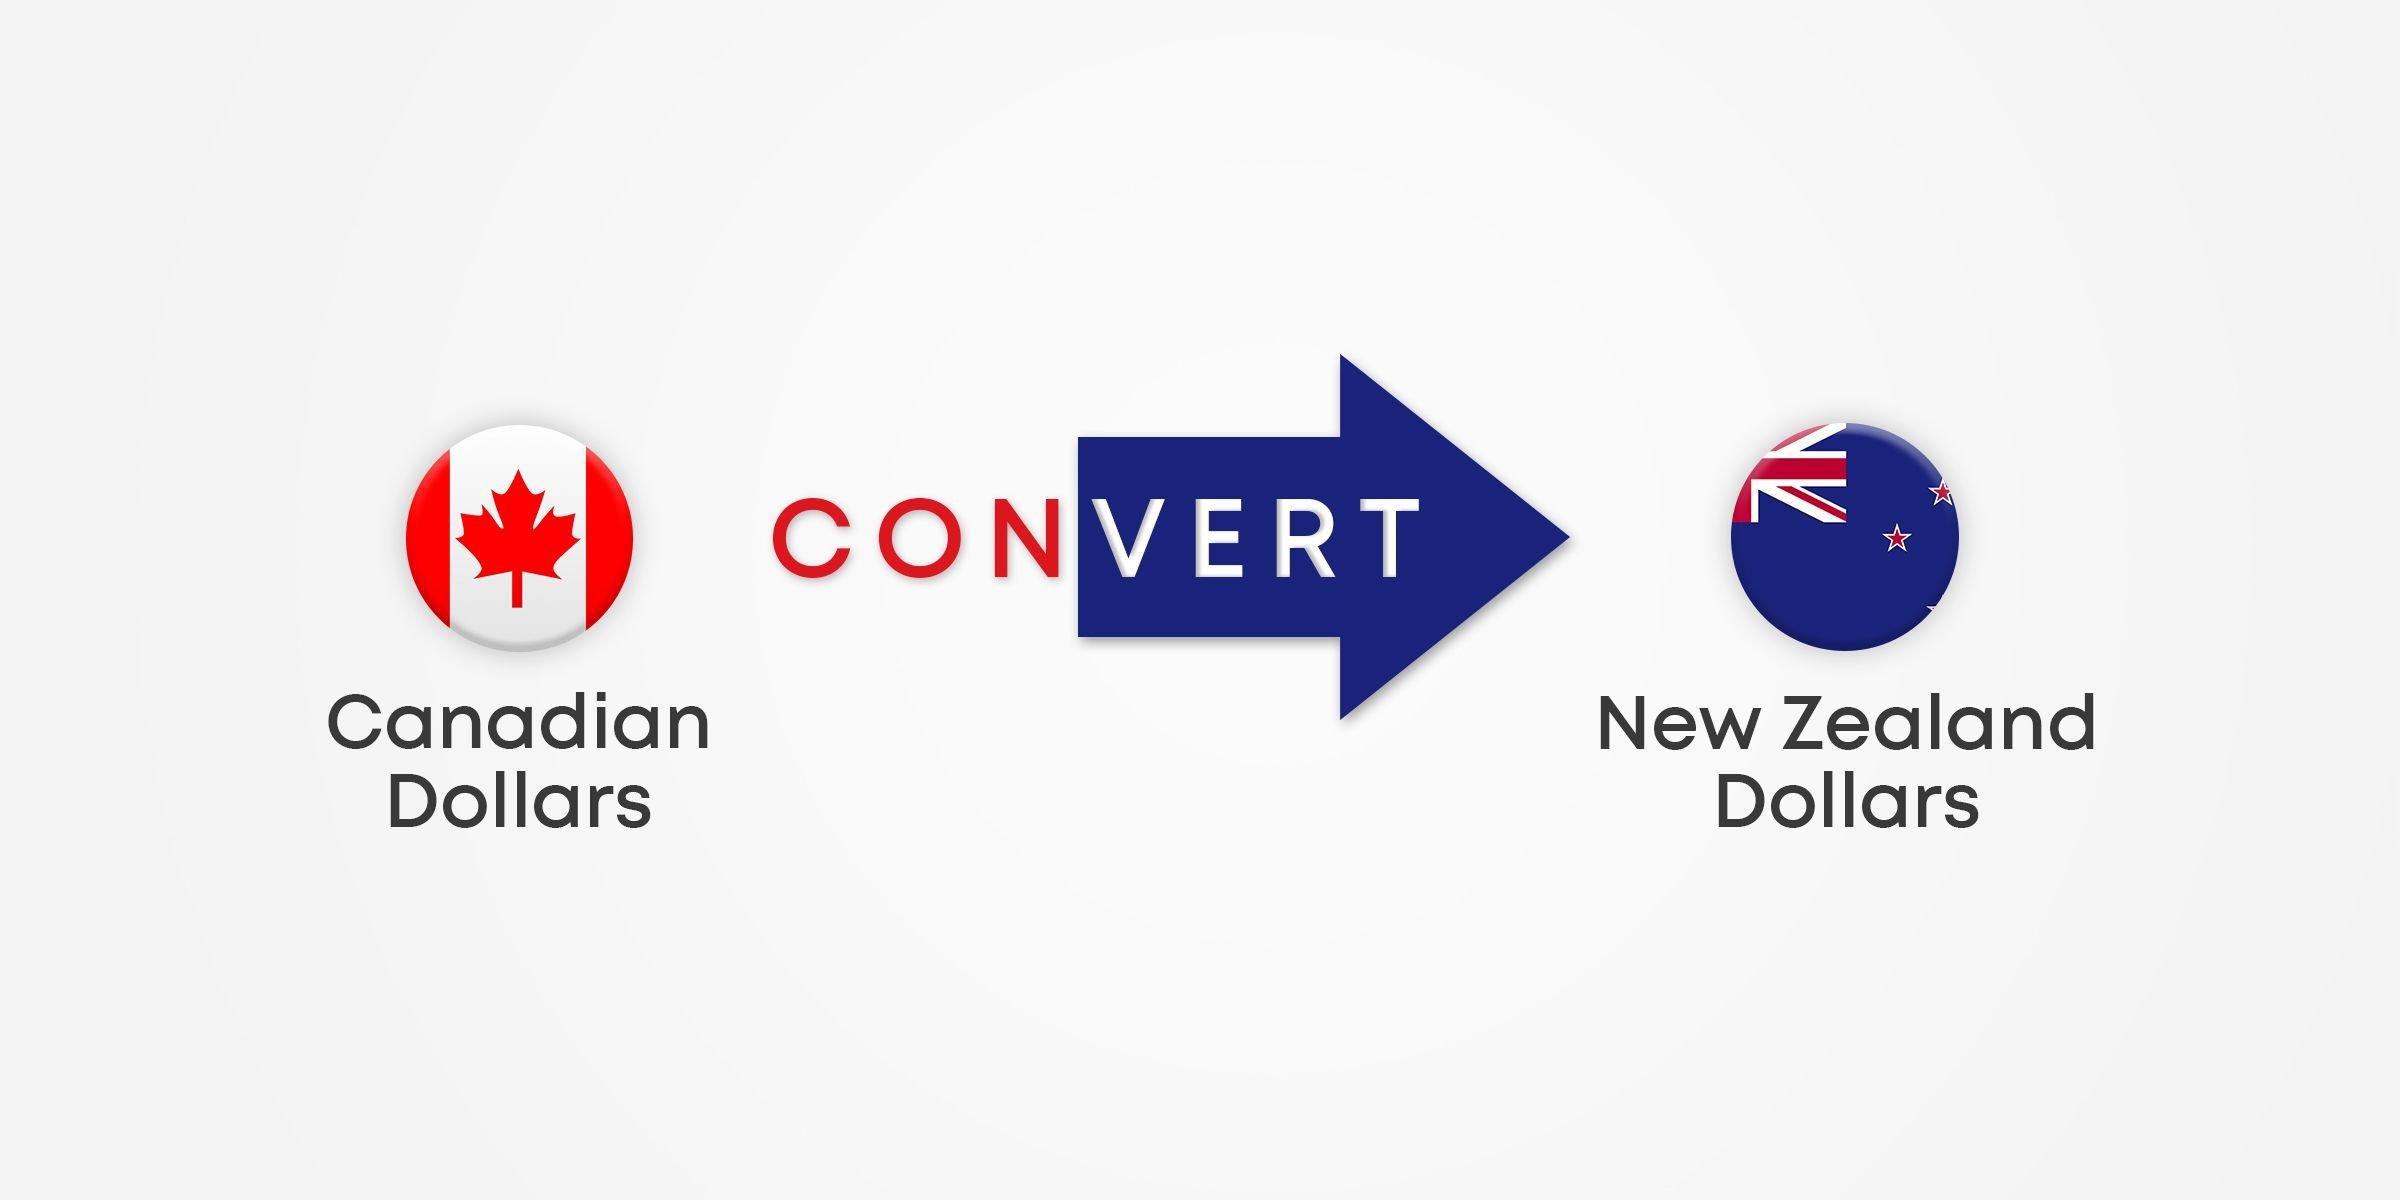 How to Convert your Canadian Dollars to New Zealand Dollars?